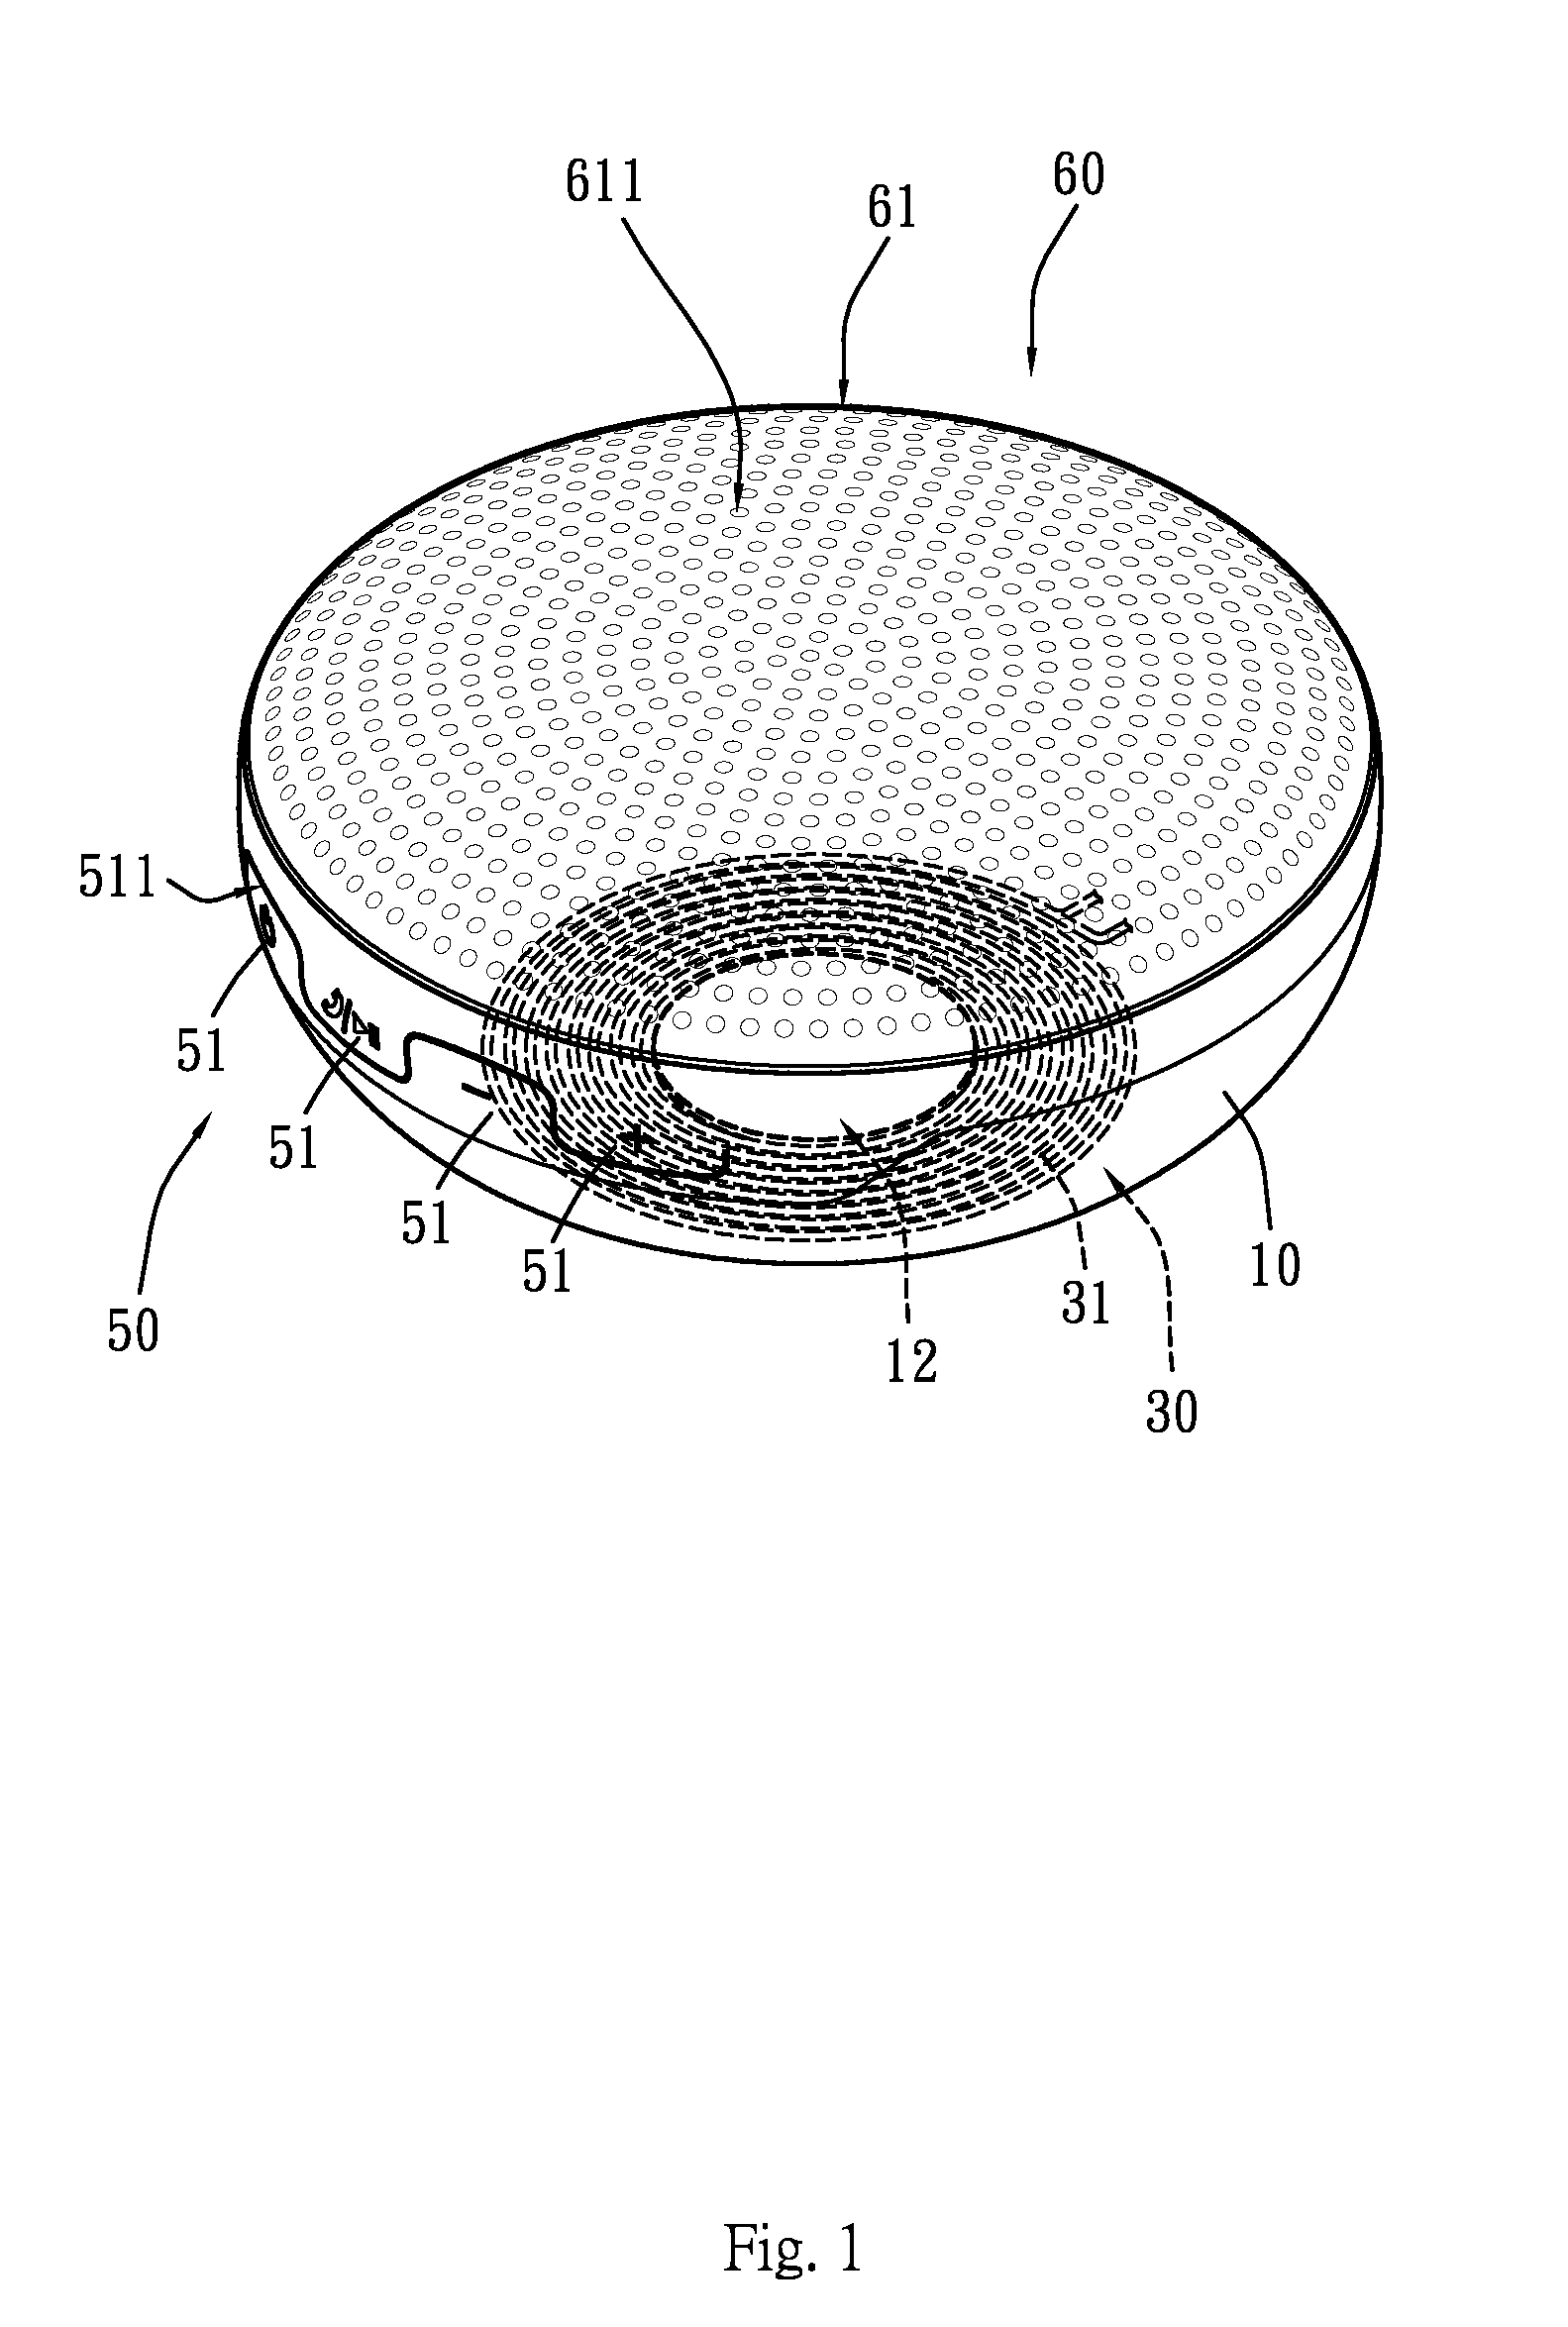 Levitated structure of bluetooth speaker